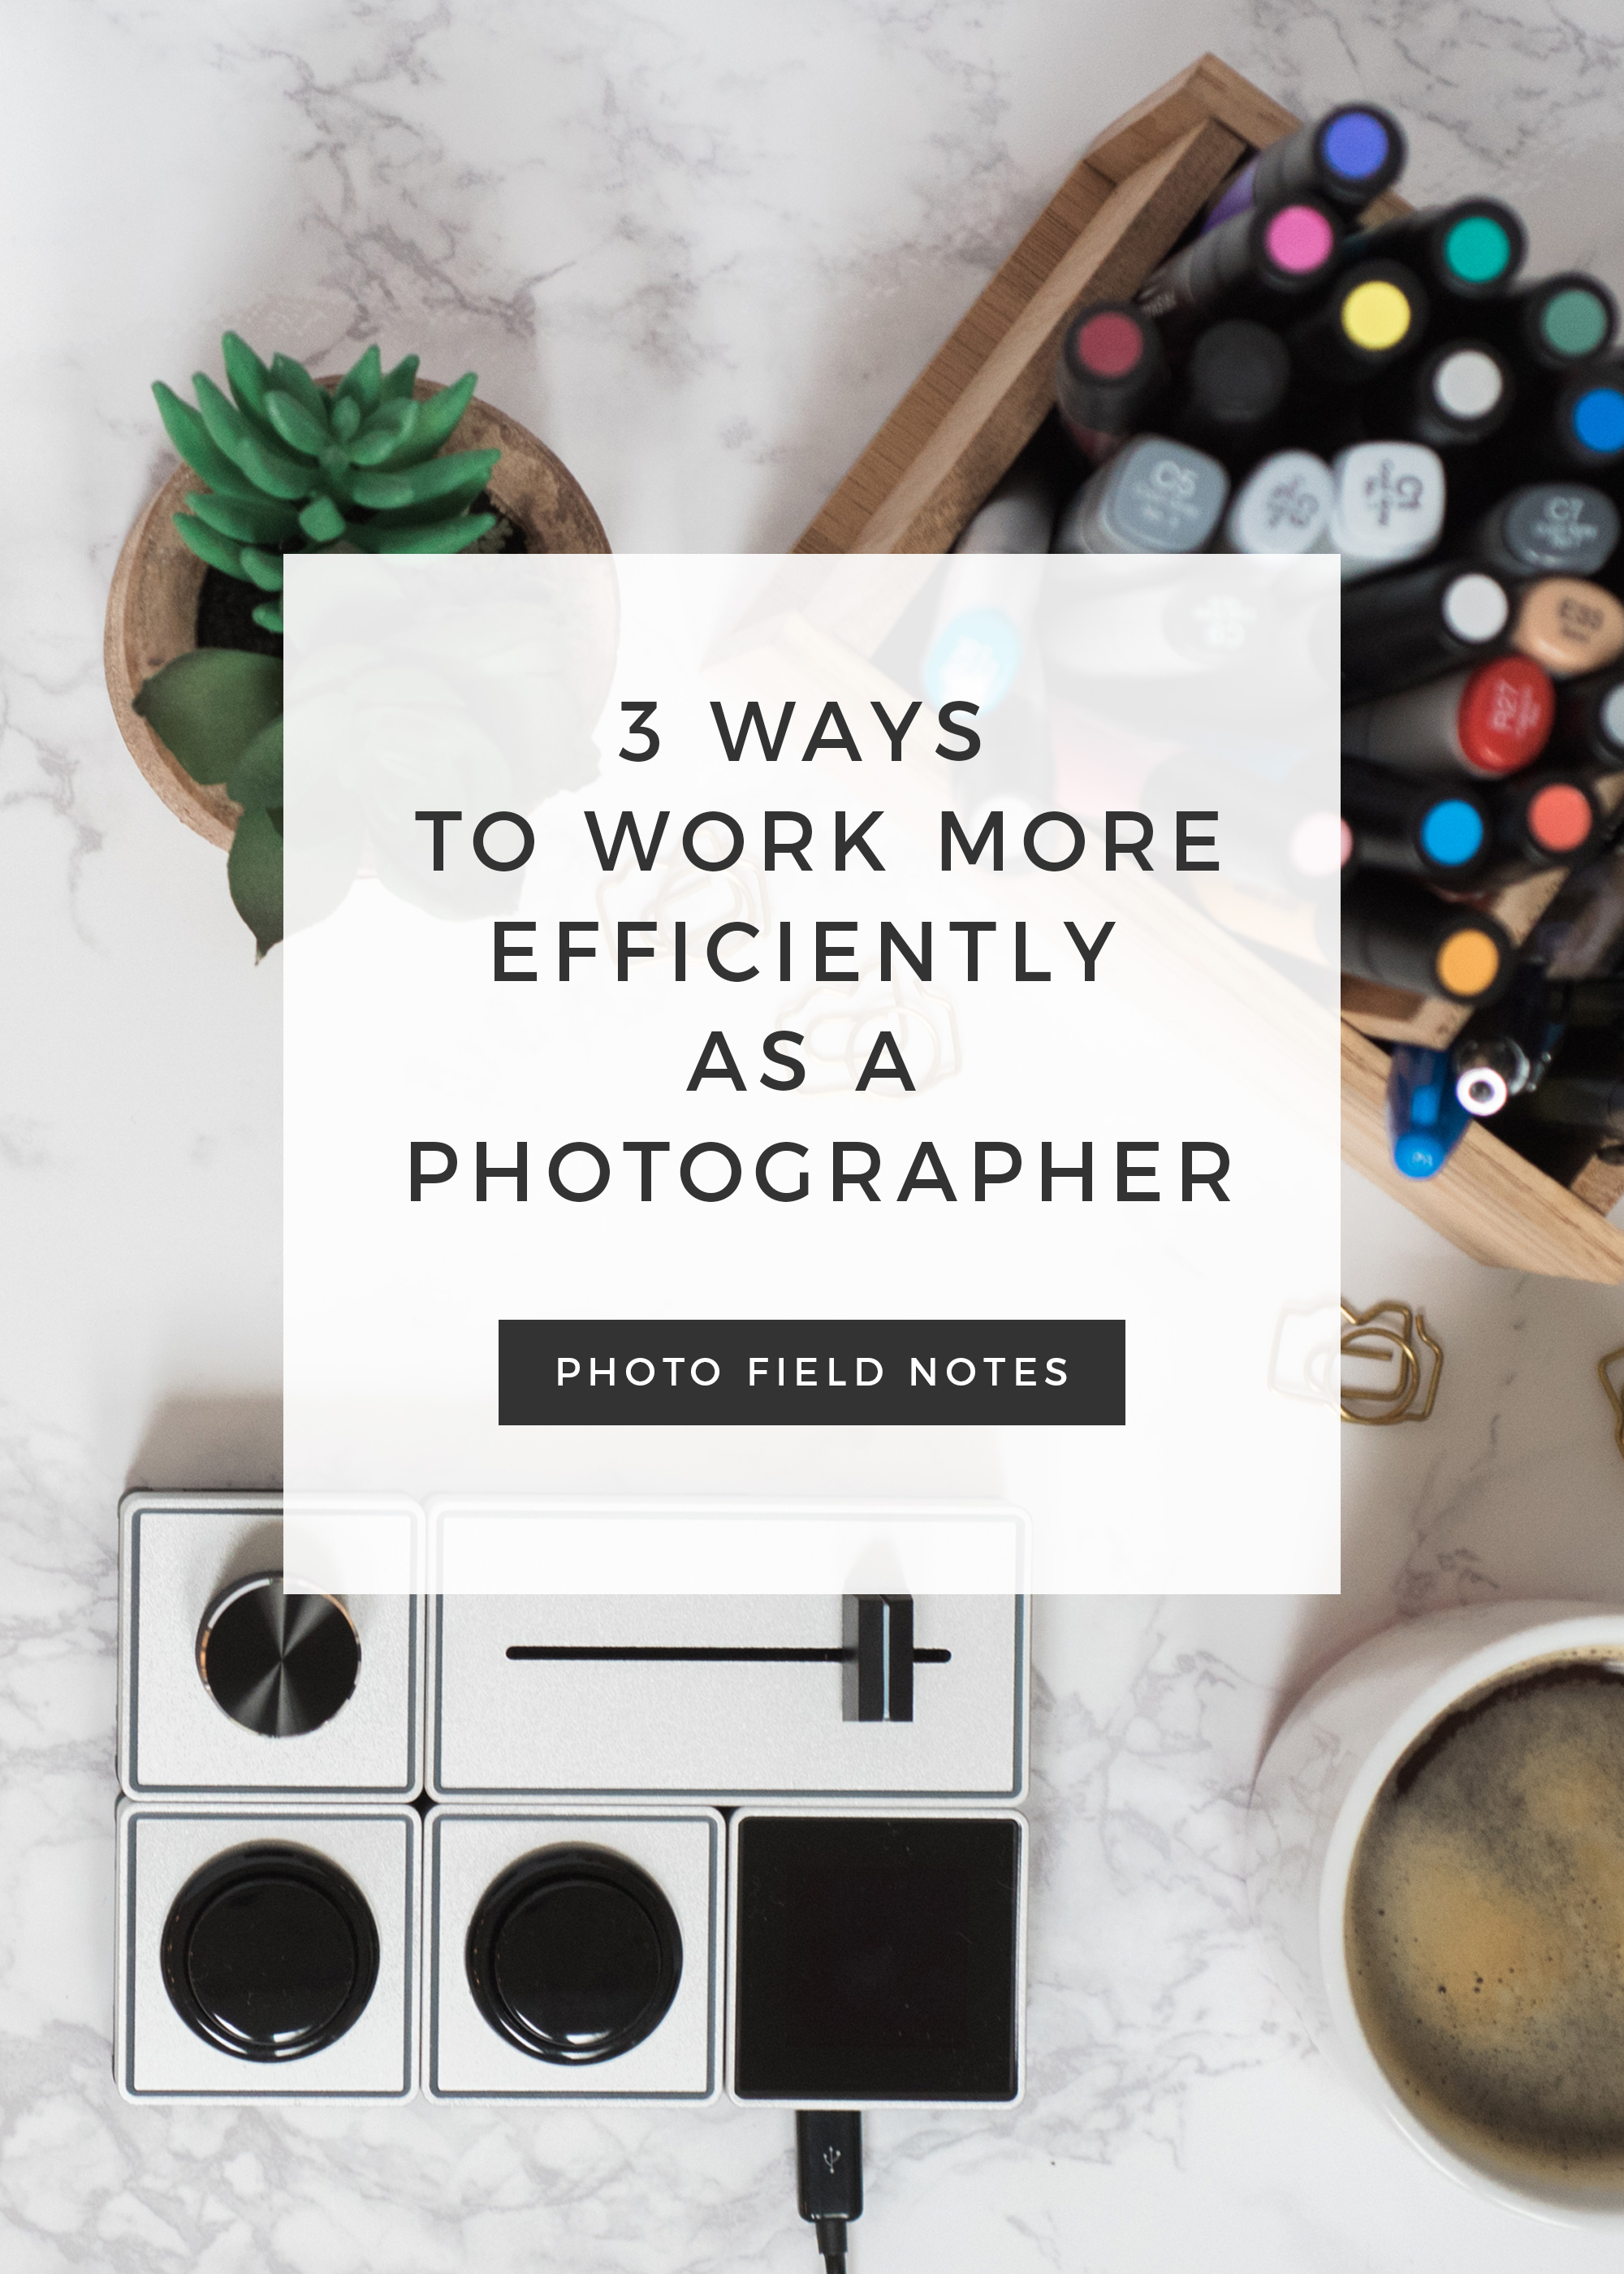 3 ways to save time as a photographer